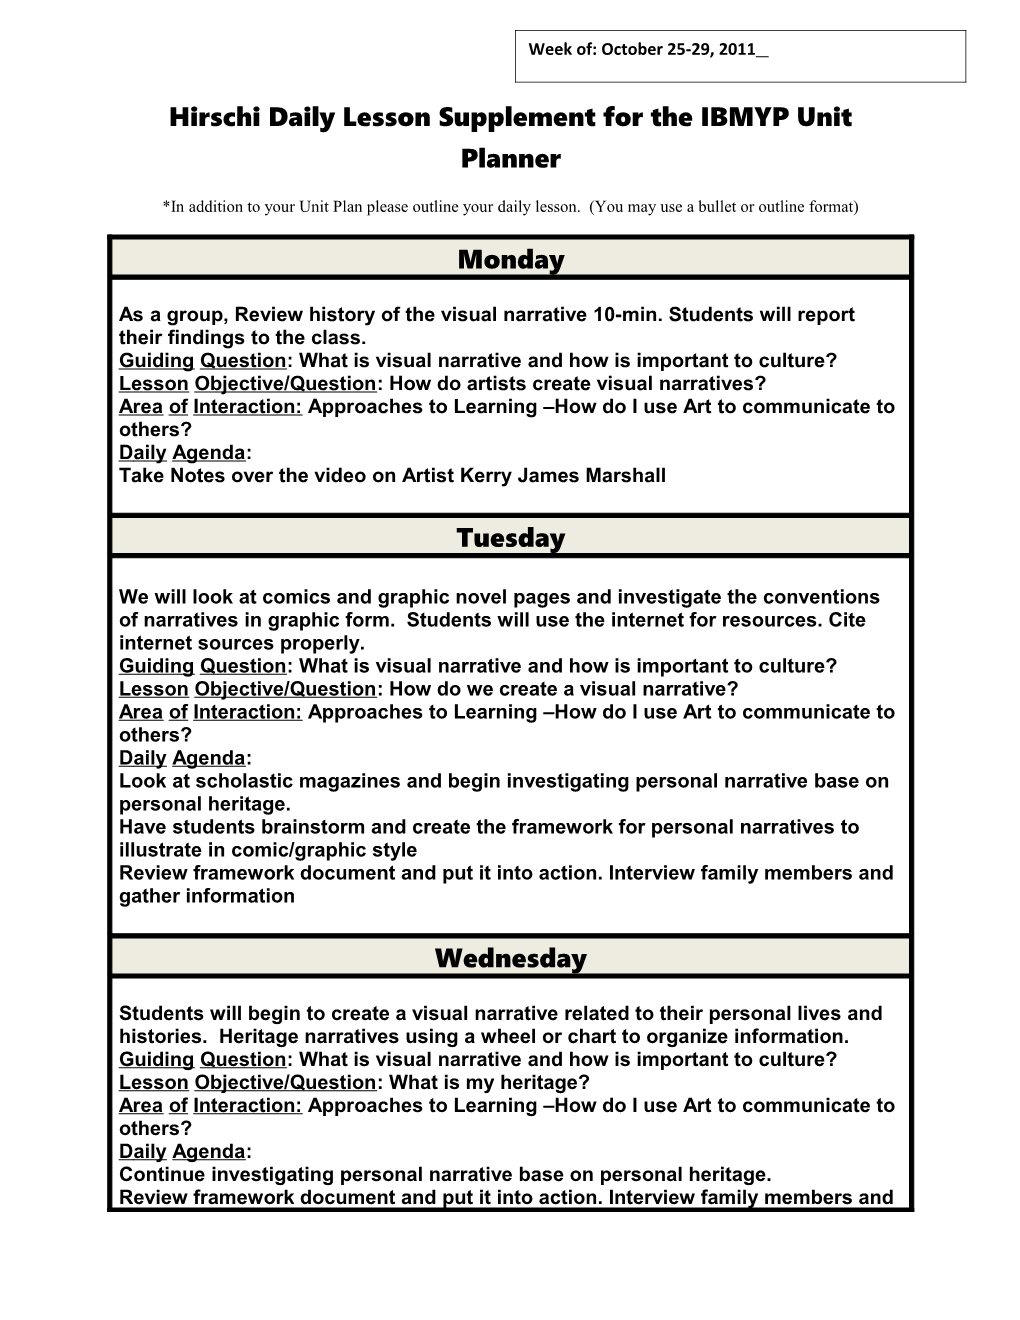 Hirschi Daily Lesson Supplement for the IBMYP Unit Planner